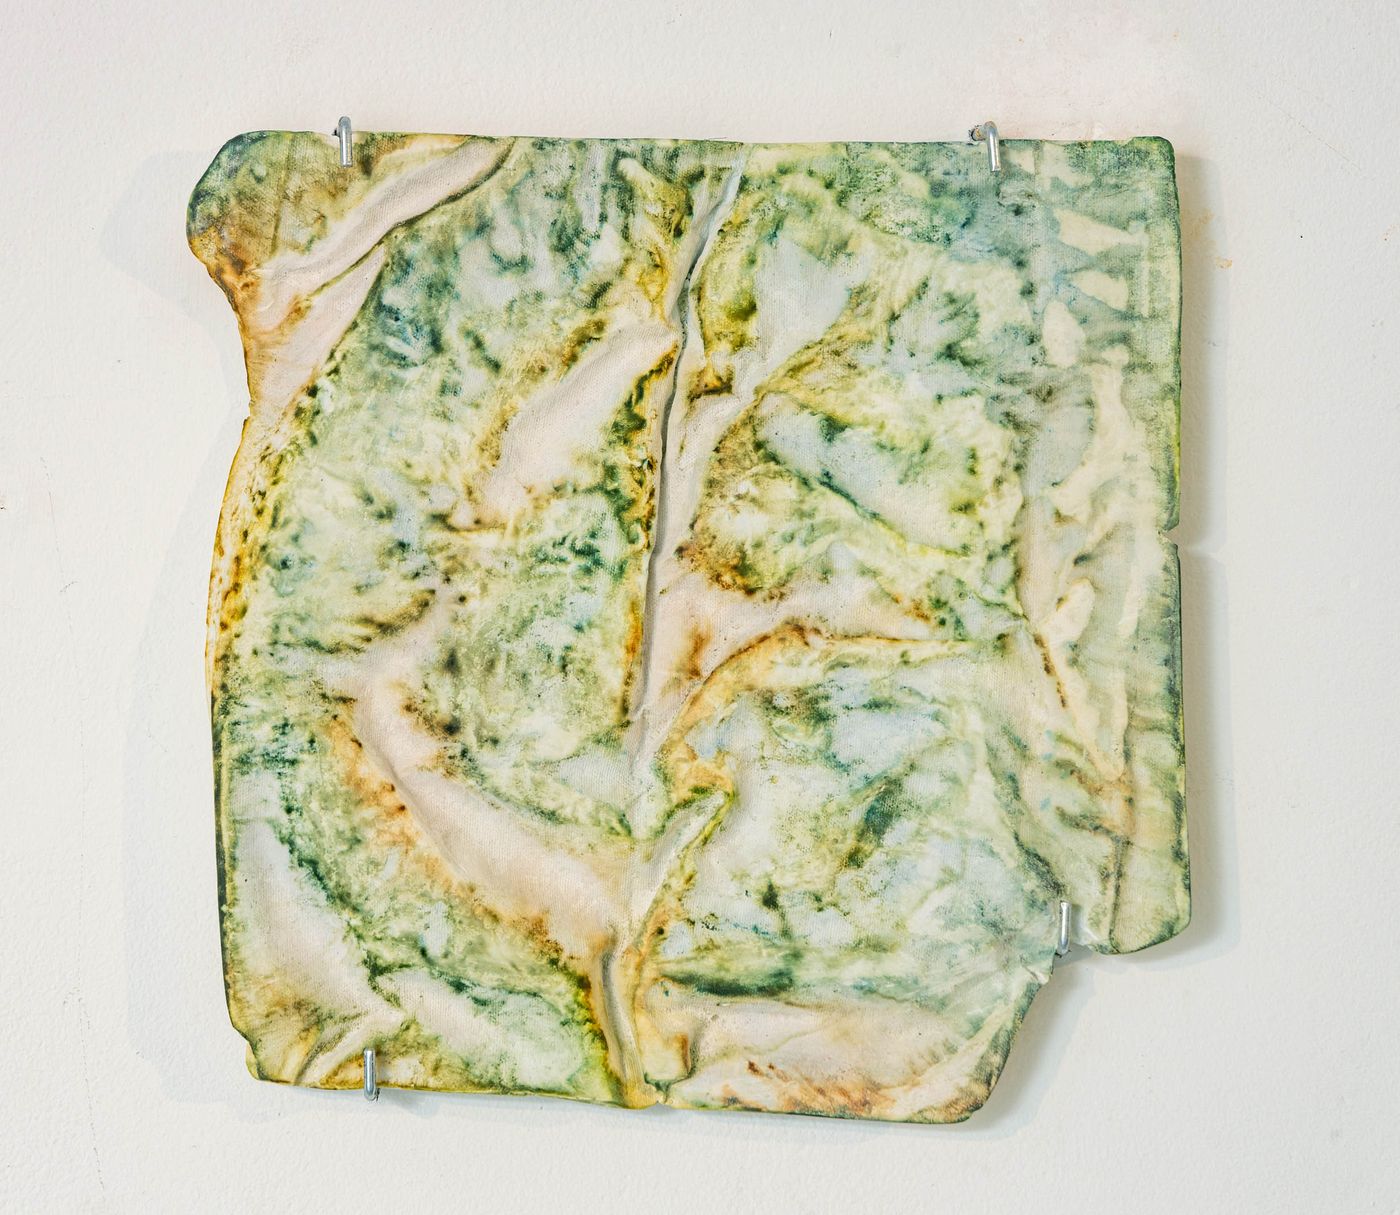 Fabric, 2022. Plaster and dye; 12.5 x 12.5 in. Photo: Meghan Olson.